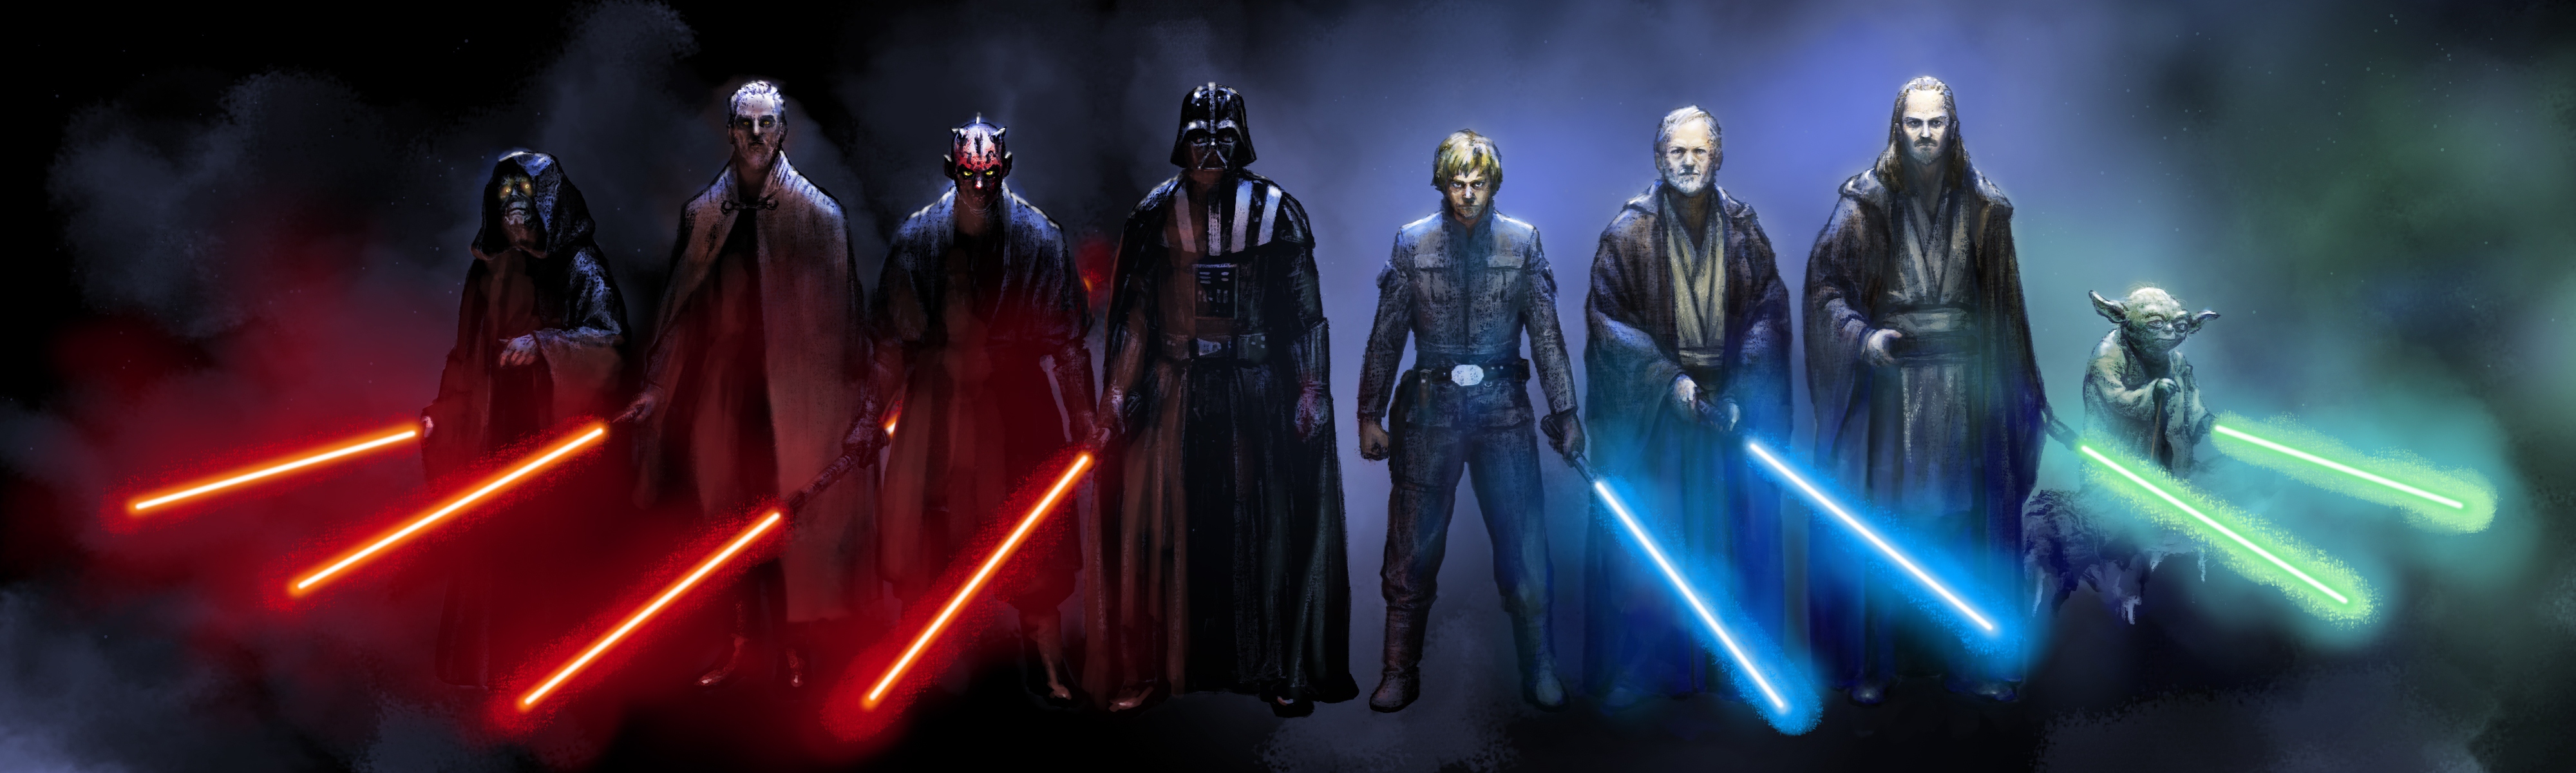 star wars, Sci fi, Science fiction, Jedi, Lightsabers, Weapons, Entertainment, Movies, Games, Video games Wallpaper